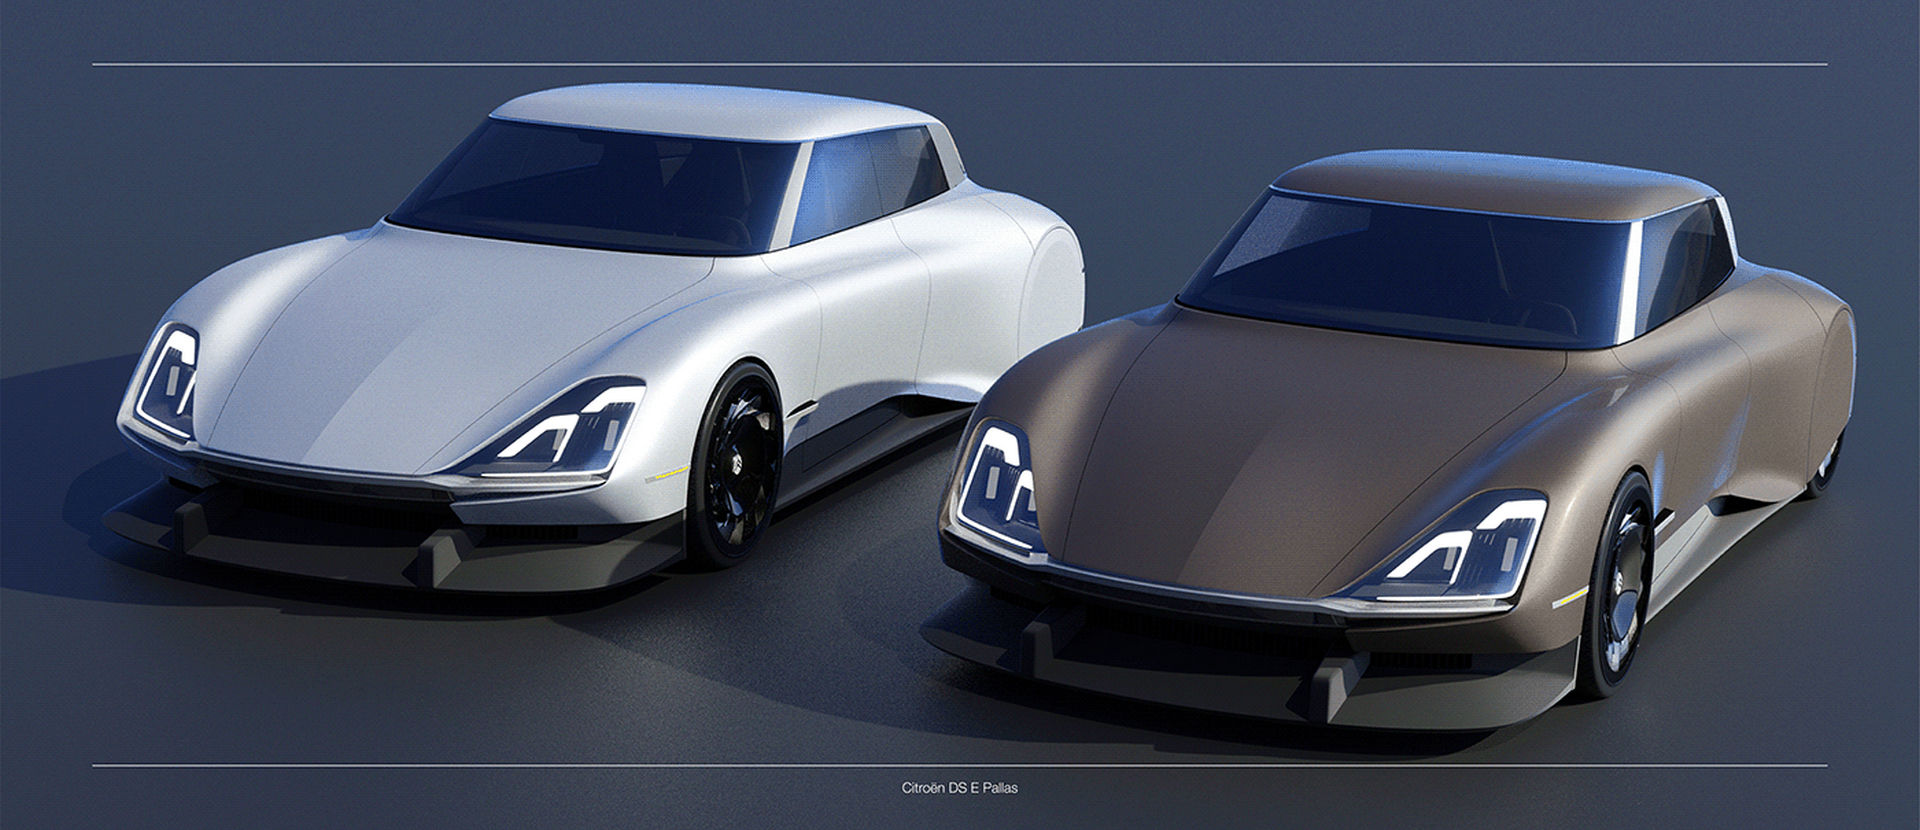 Citroen Ds Pallas Homage Study Re Imagines French Icon As An Electric Flagship For The s Carscoops